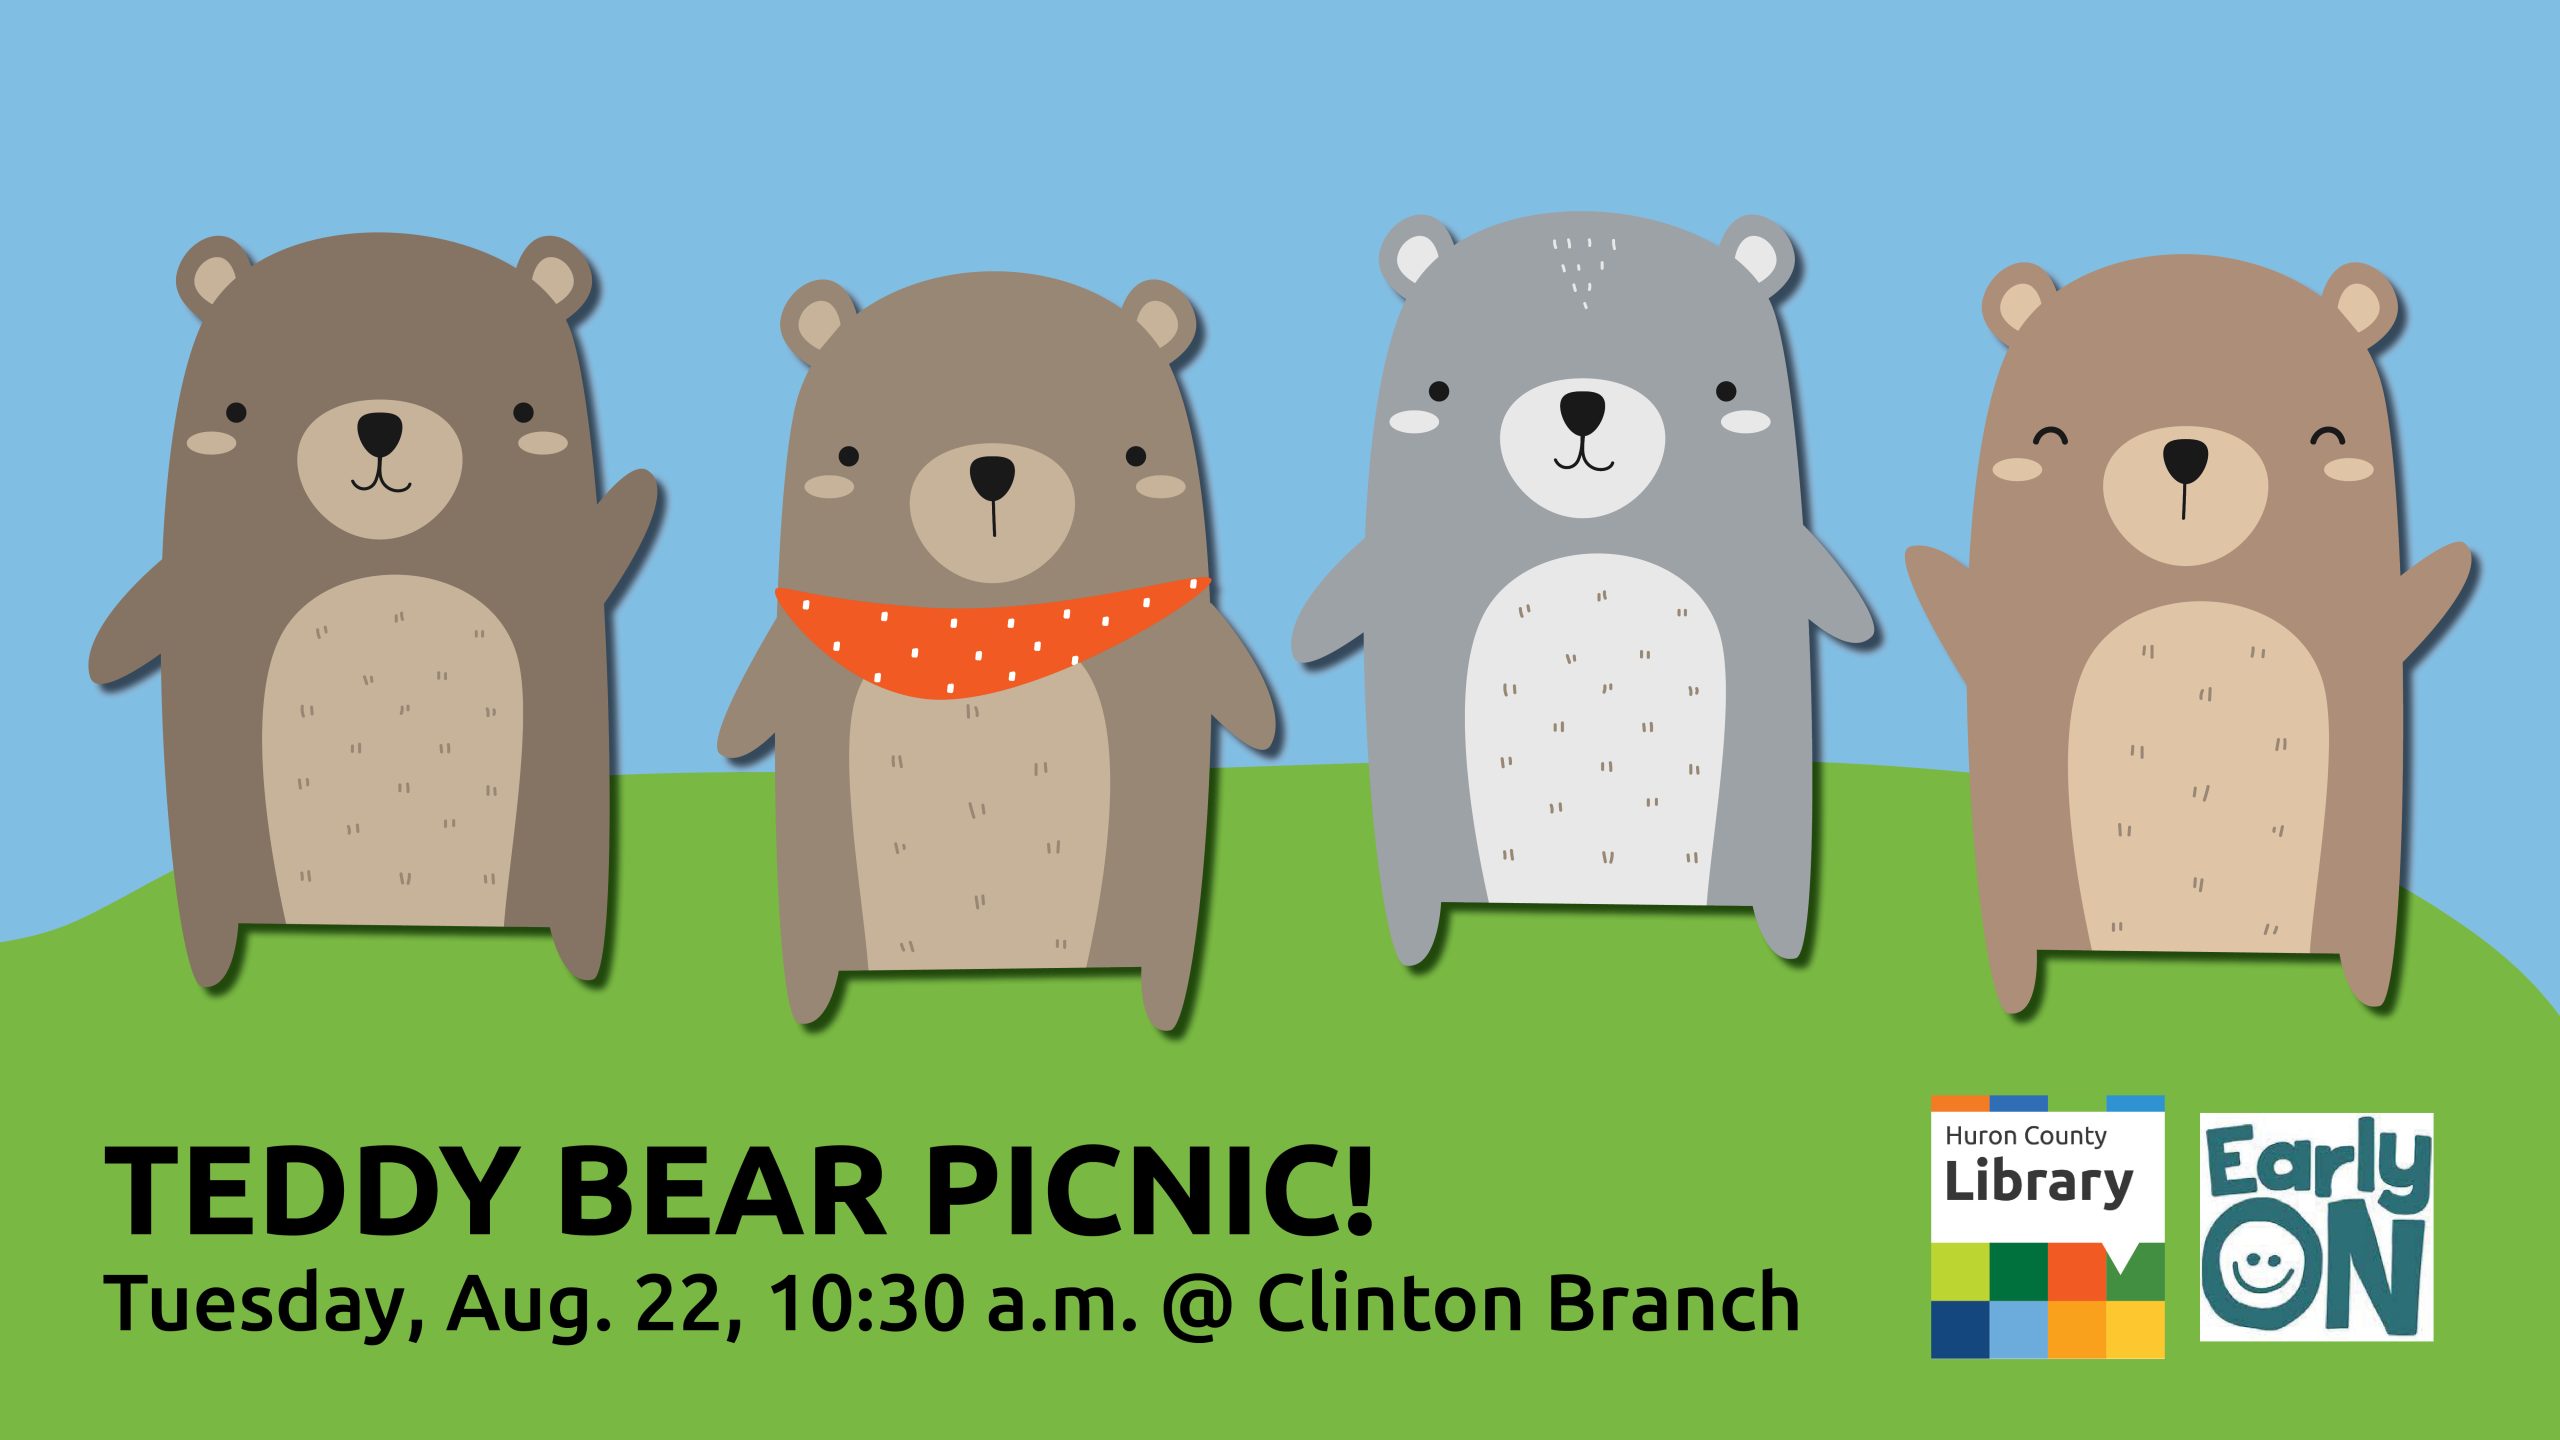 illustration of four teddy bears standing on the grass with text promoting teddy bear picnic at Clinton Branch